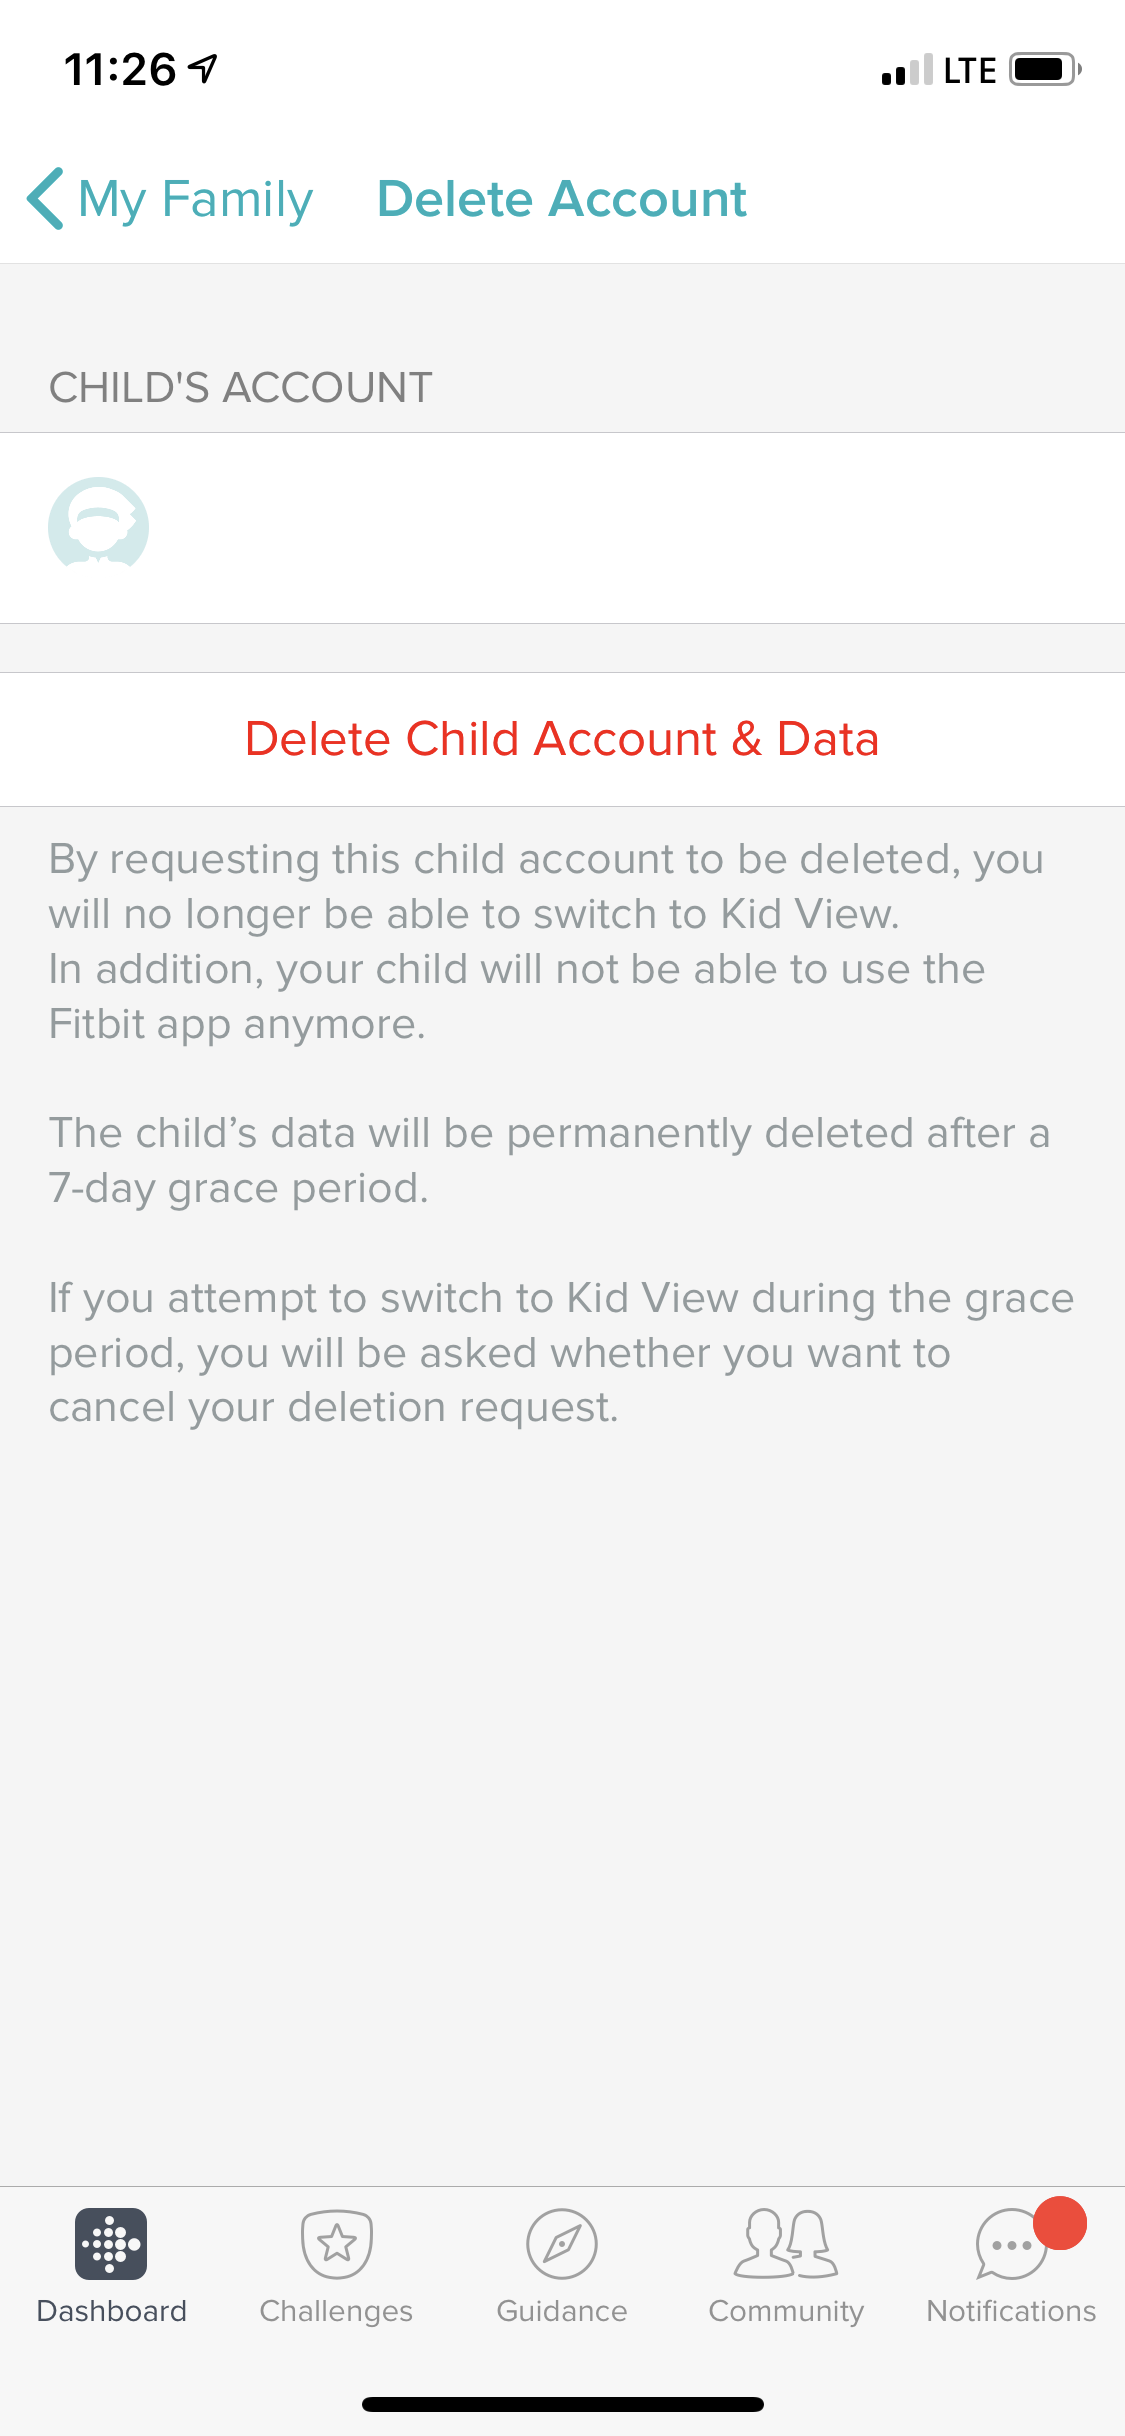 set up family account fitbit